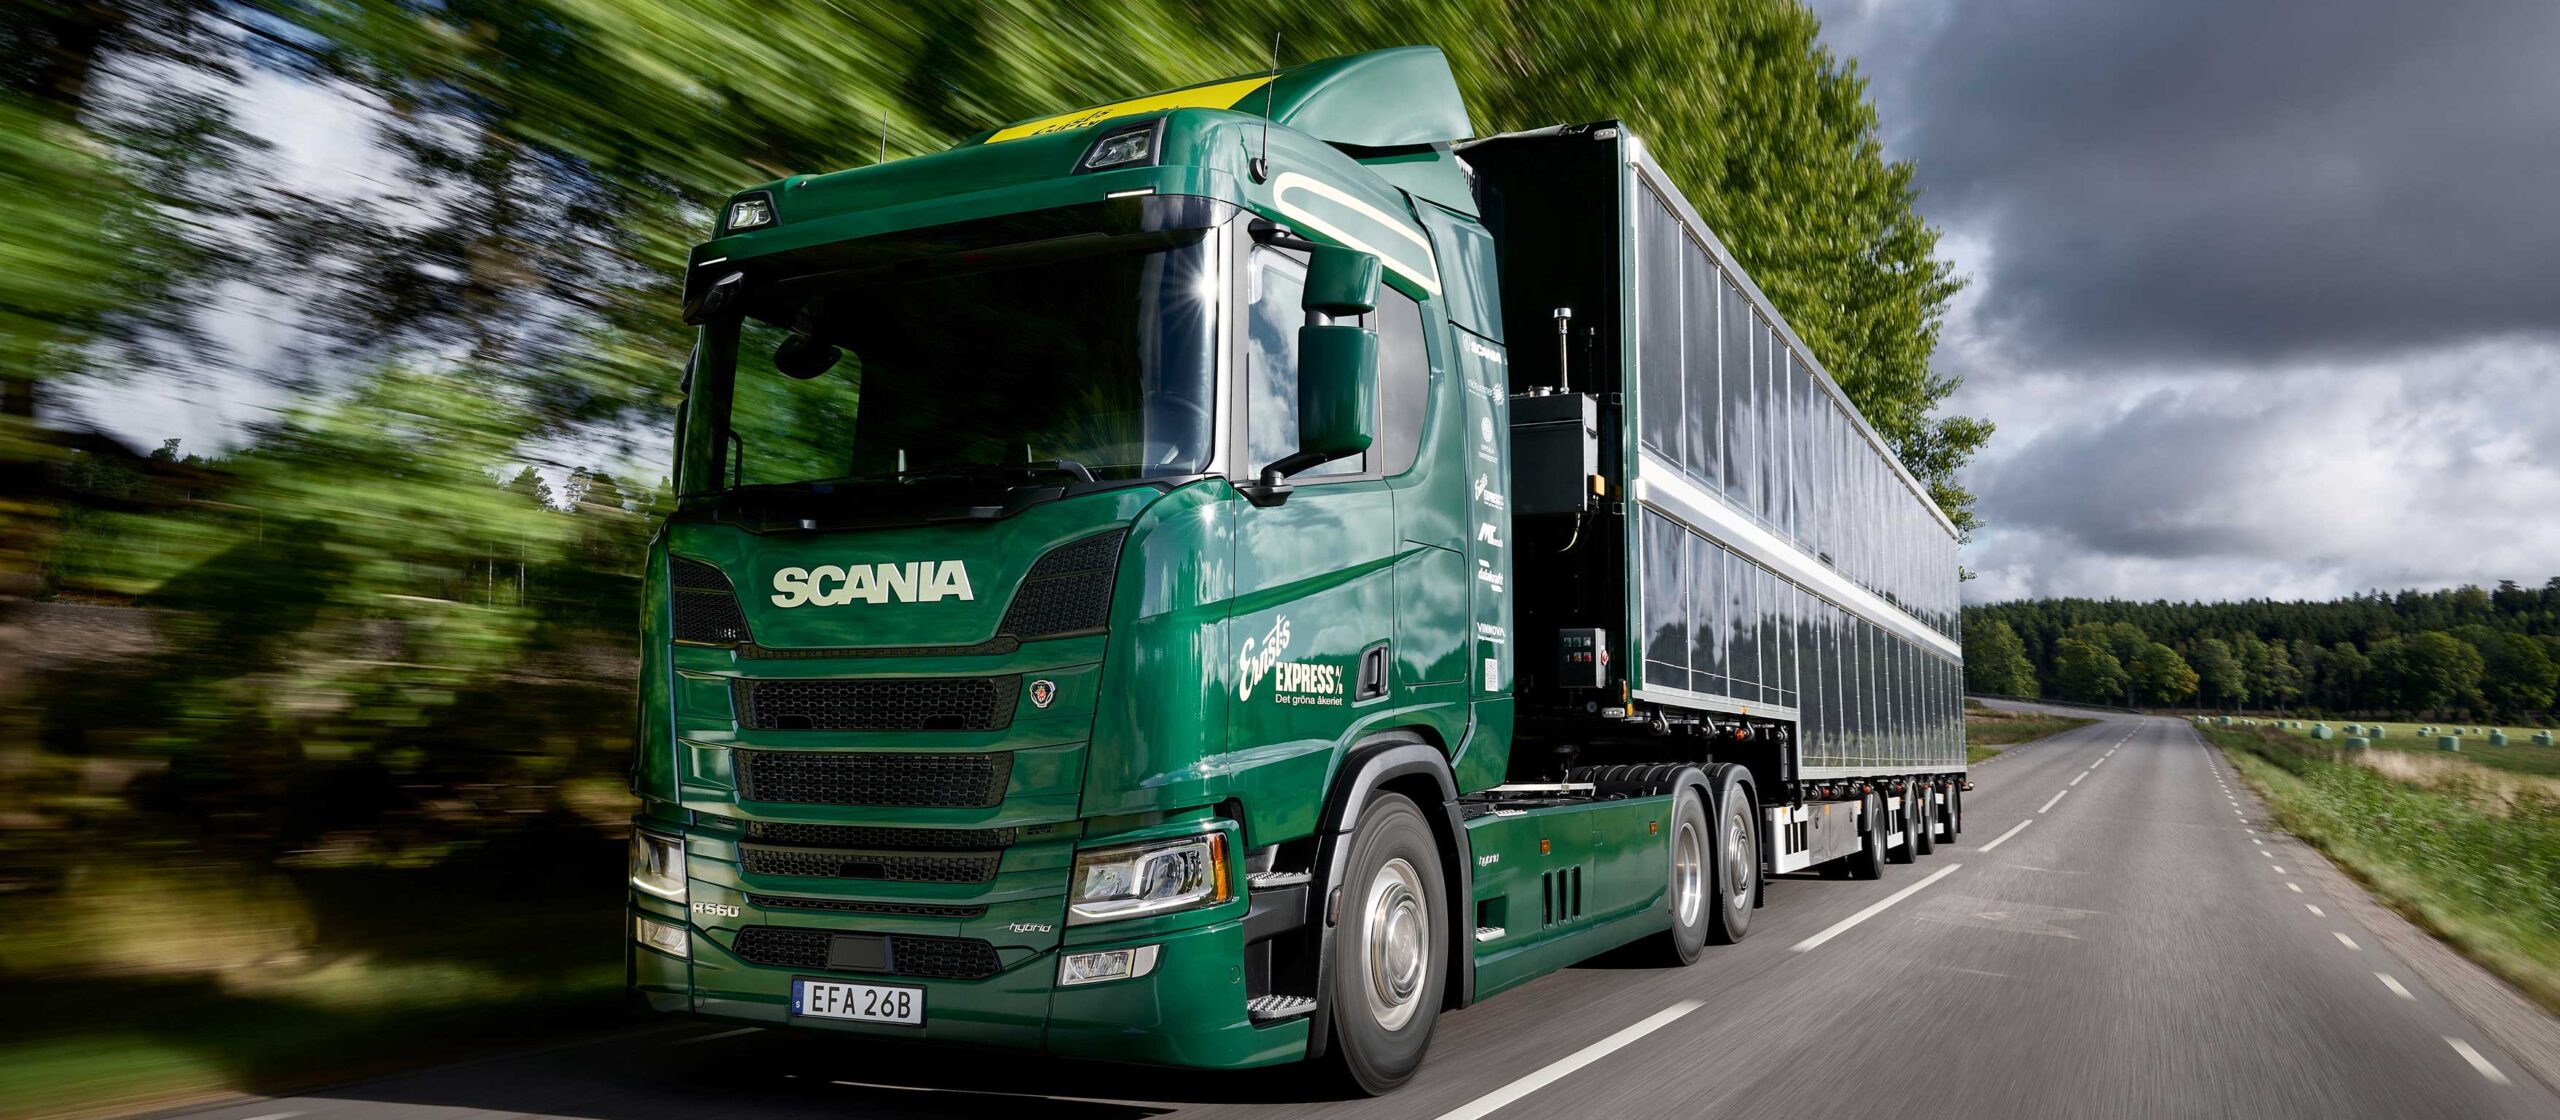 First test for new solar-​powered hybrid Scania truck